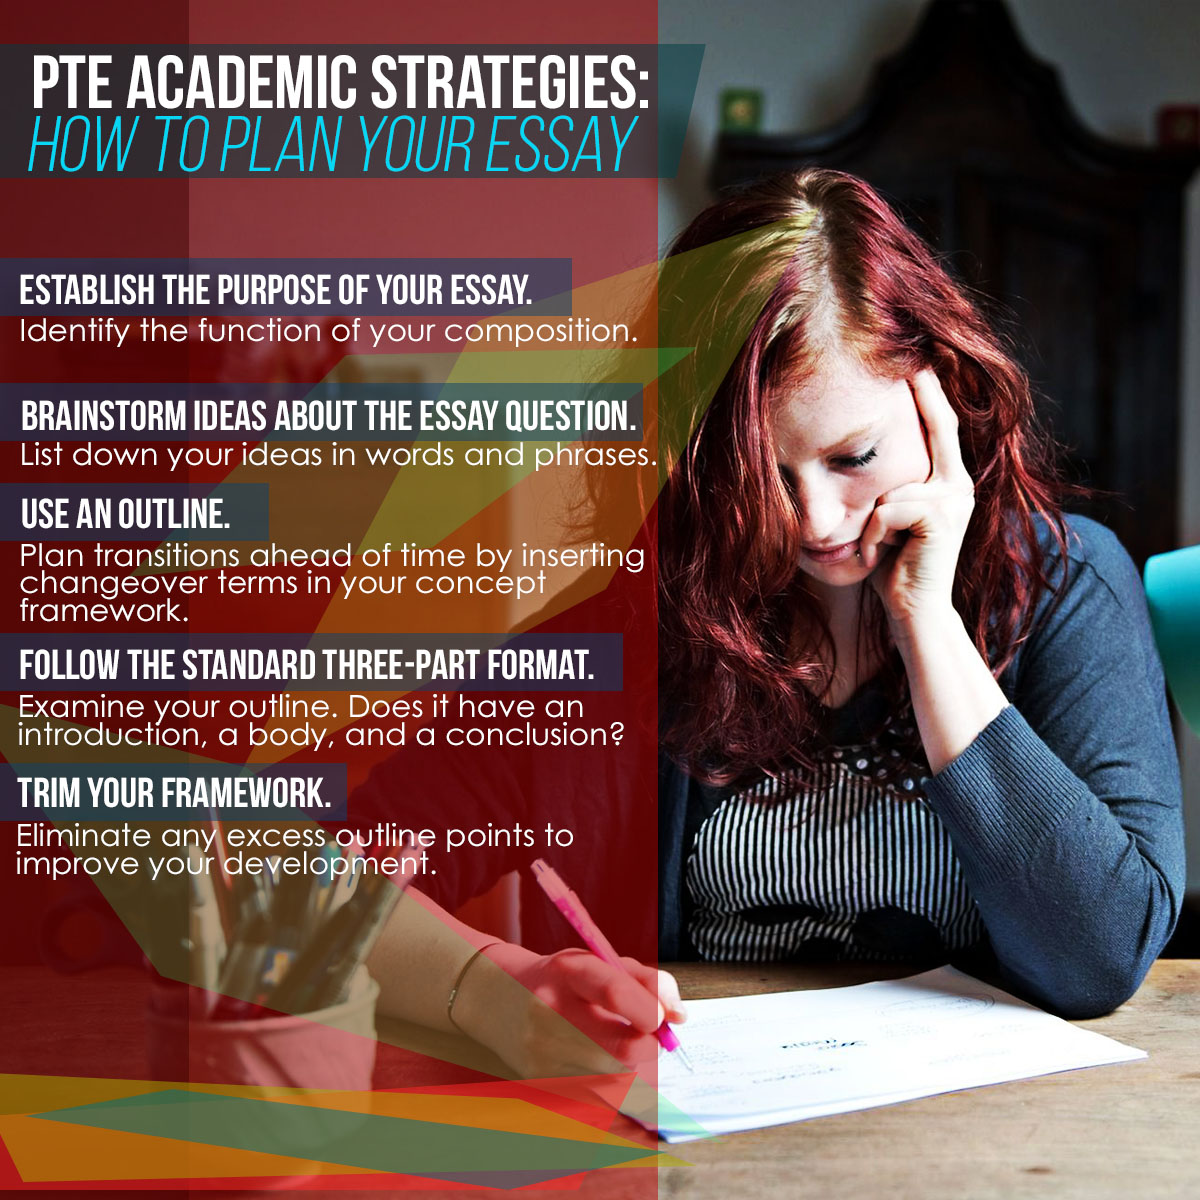 PTE Academic Strategies: How to Plan Your Essay